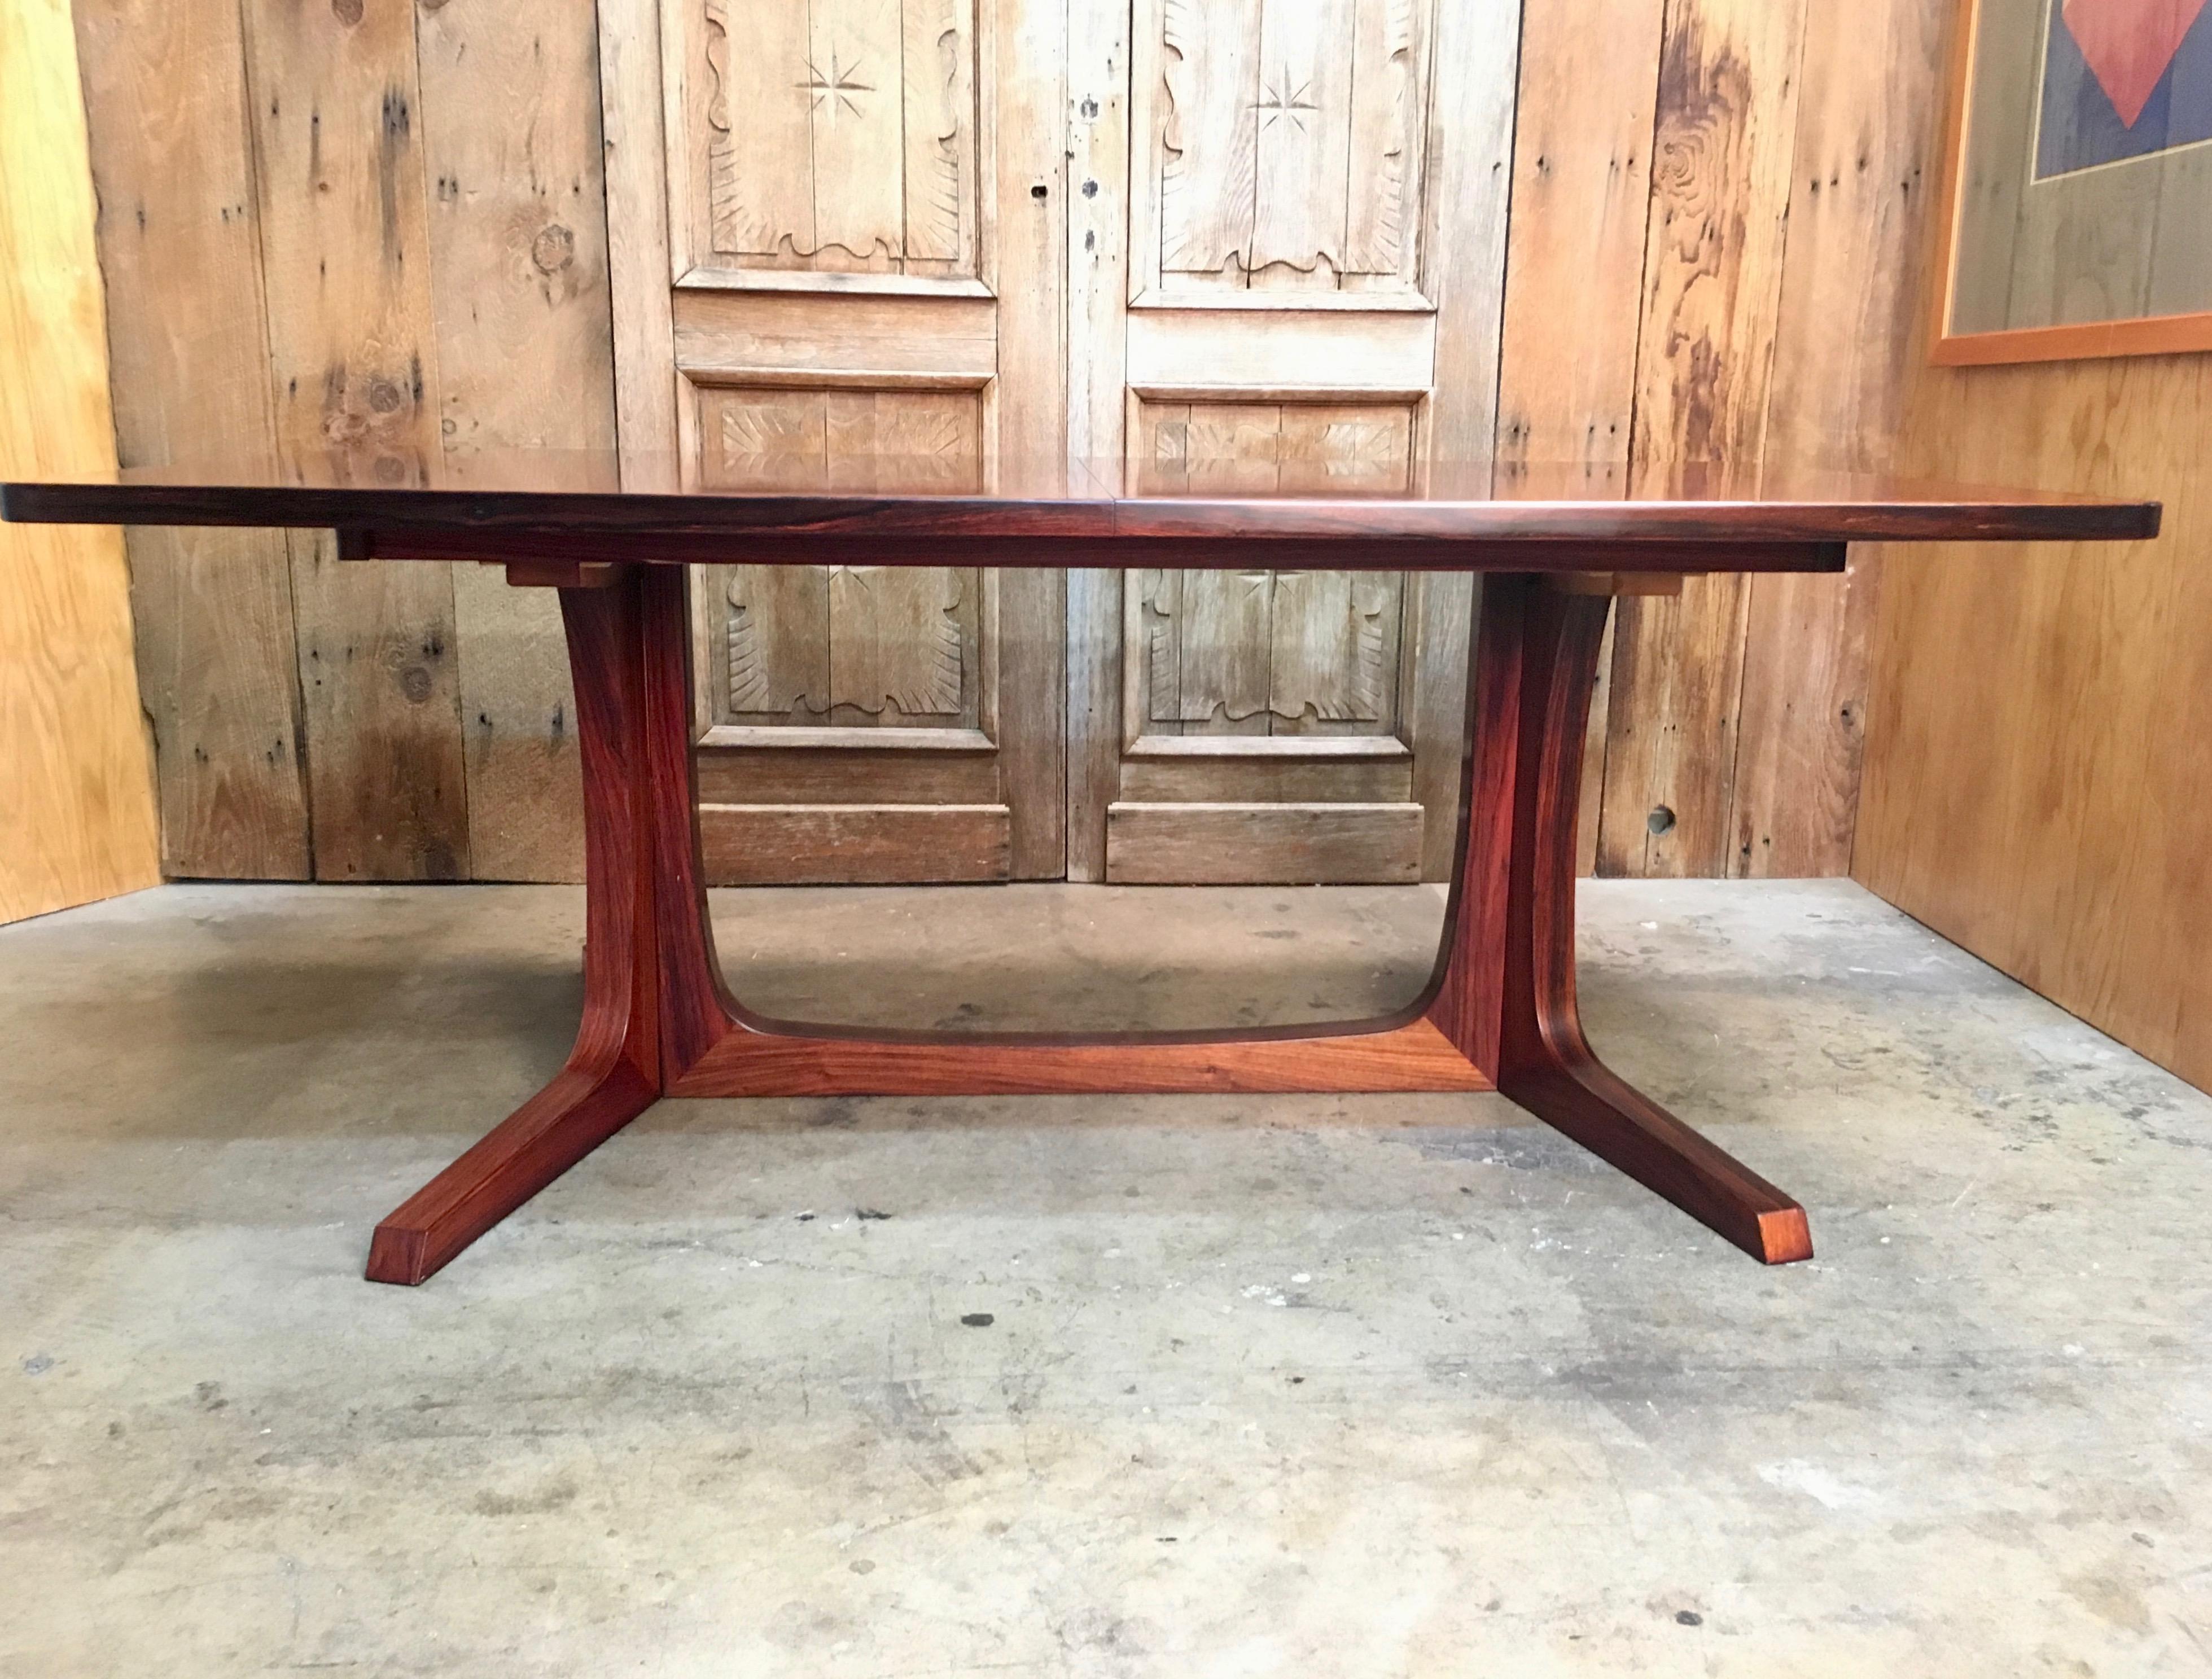 Midcentury rosewood dining table attributed to Danish designer Niels Otto Møller and produced by Gudme Möbelfabrik.
There are two original leaves that are darker then the table because of spending so much in the closet 

Chairs not included.